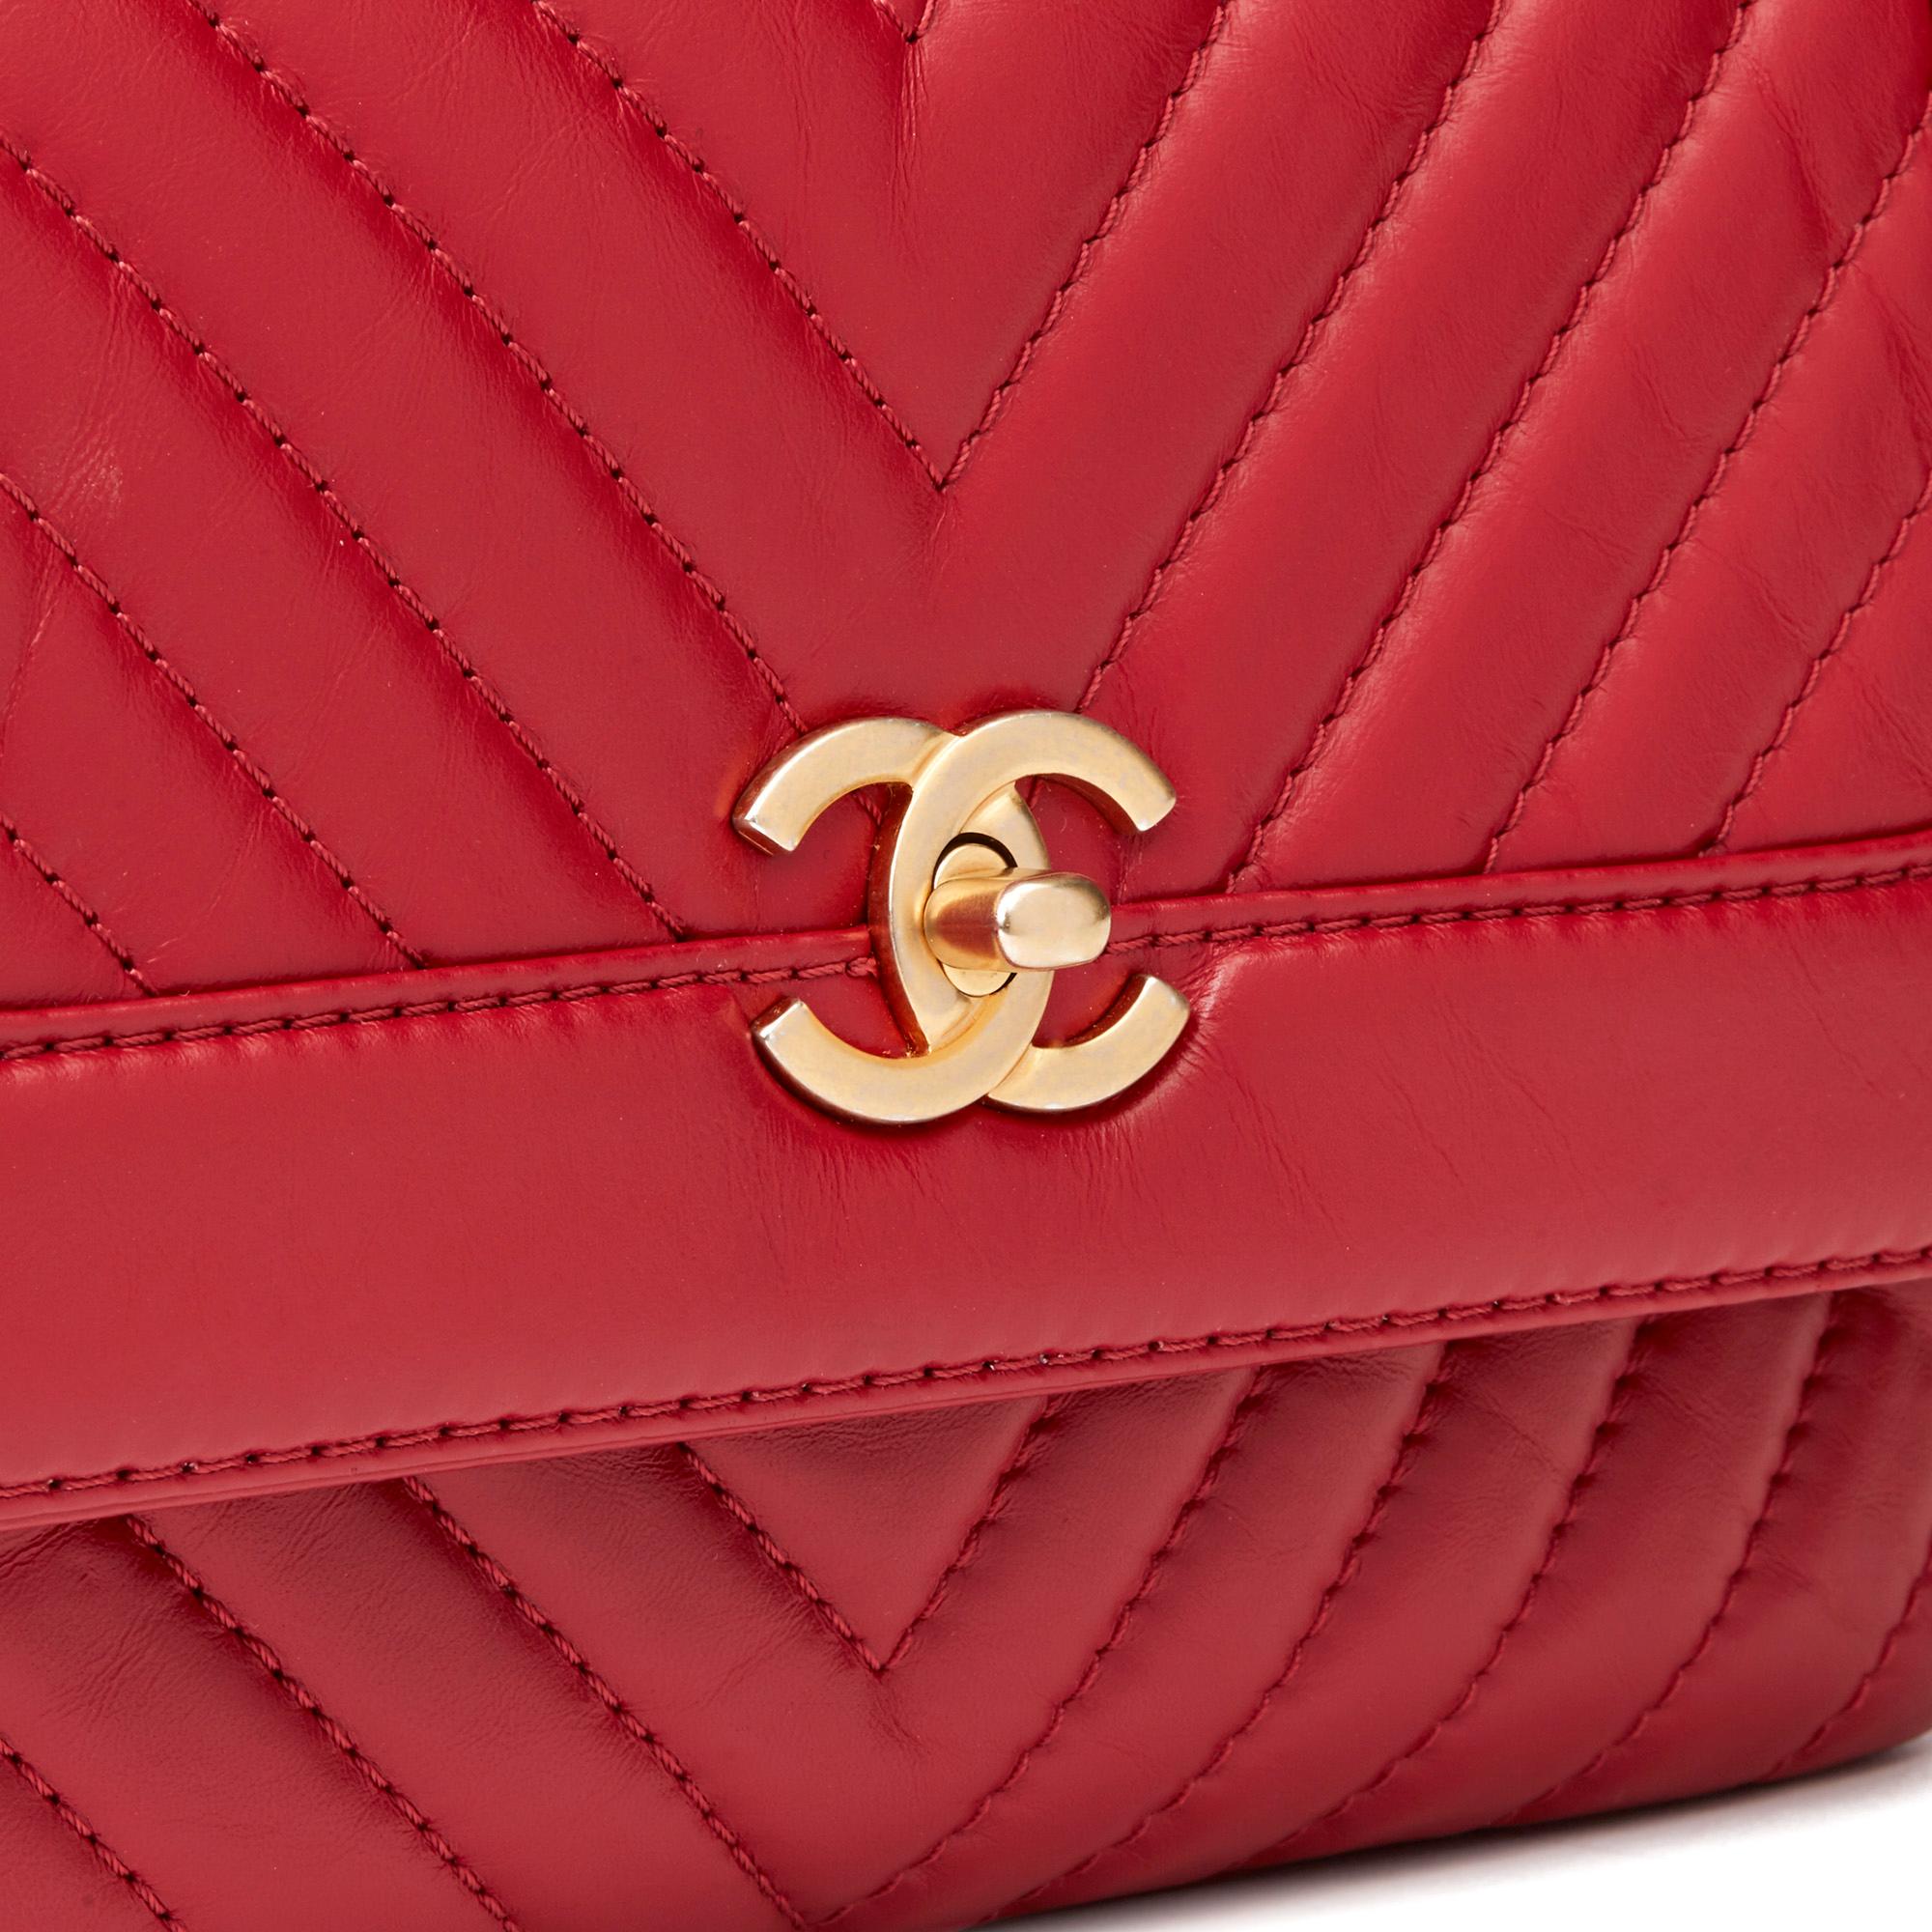 Women's 2018 Chanel Red Chevron Quilted Calfskin Leather Classic Top Handle Flap Bag